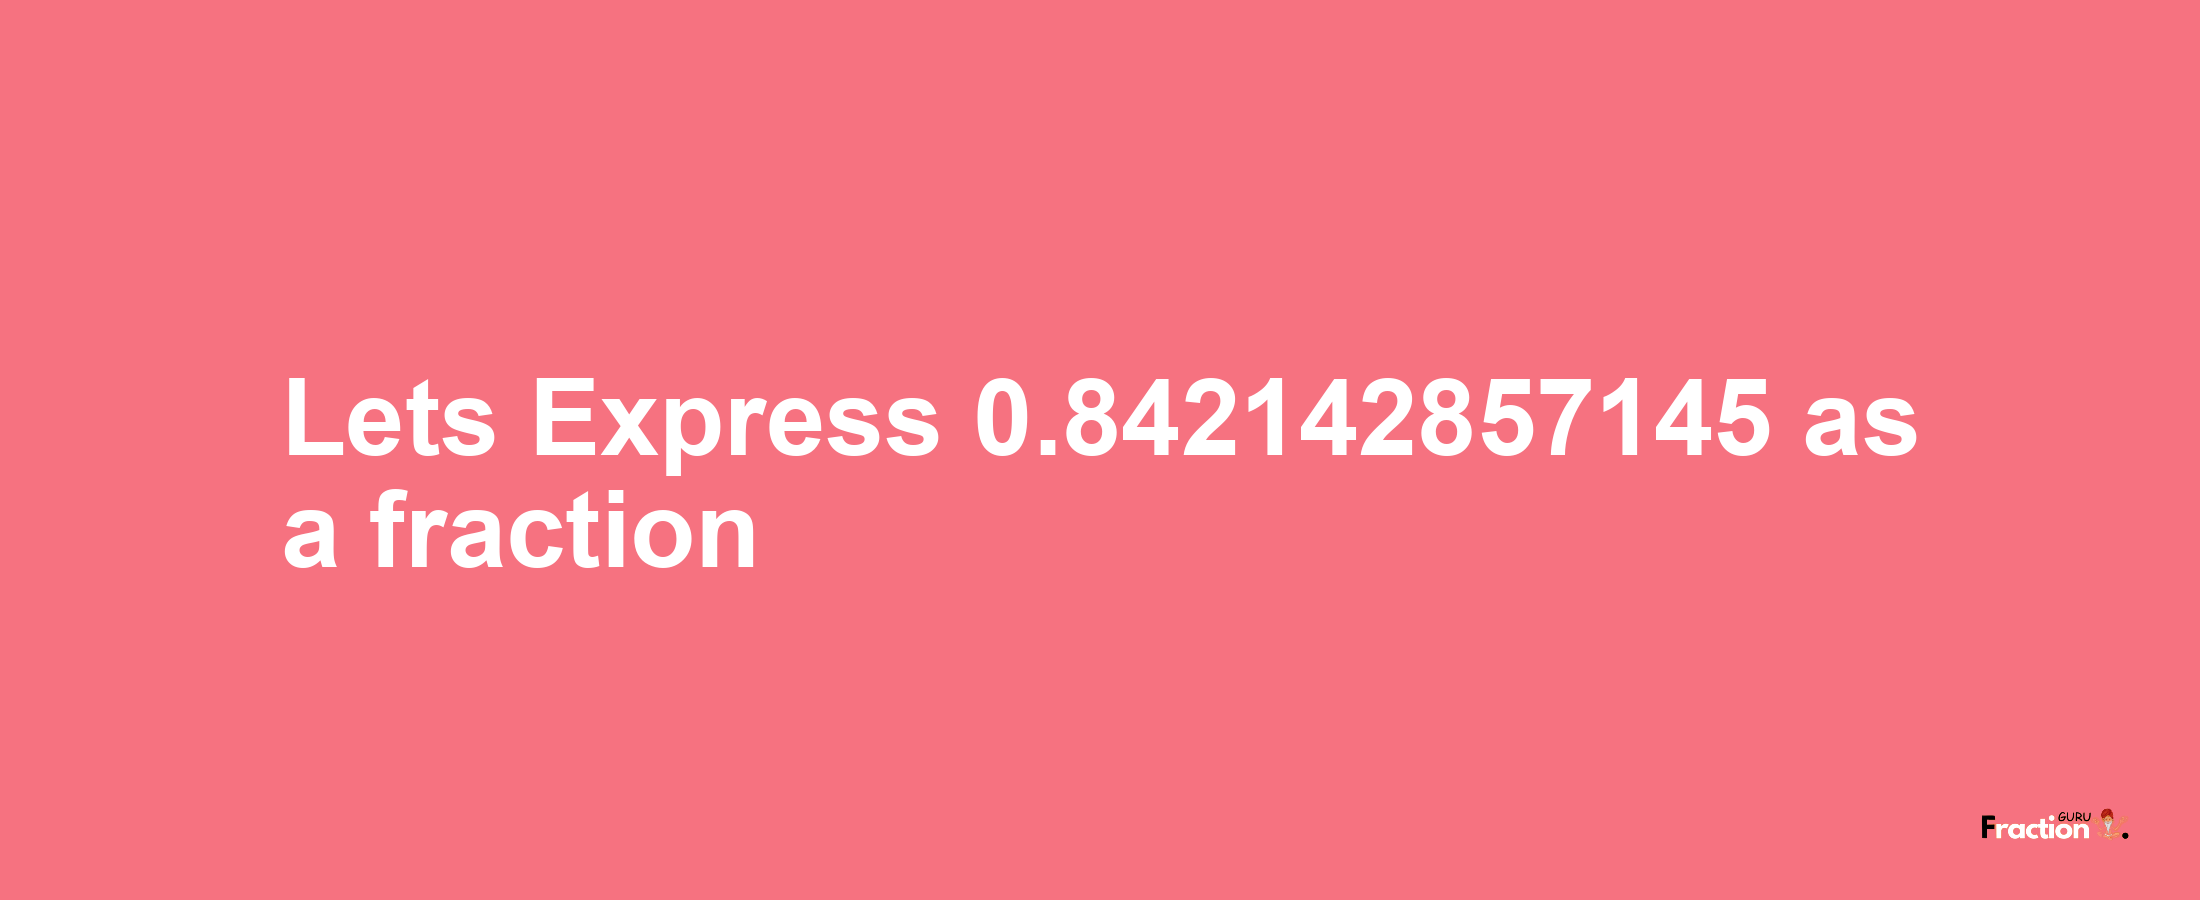 Lets Express 0.842142857145 as afraction